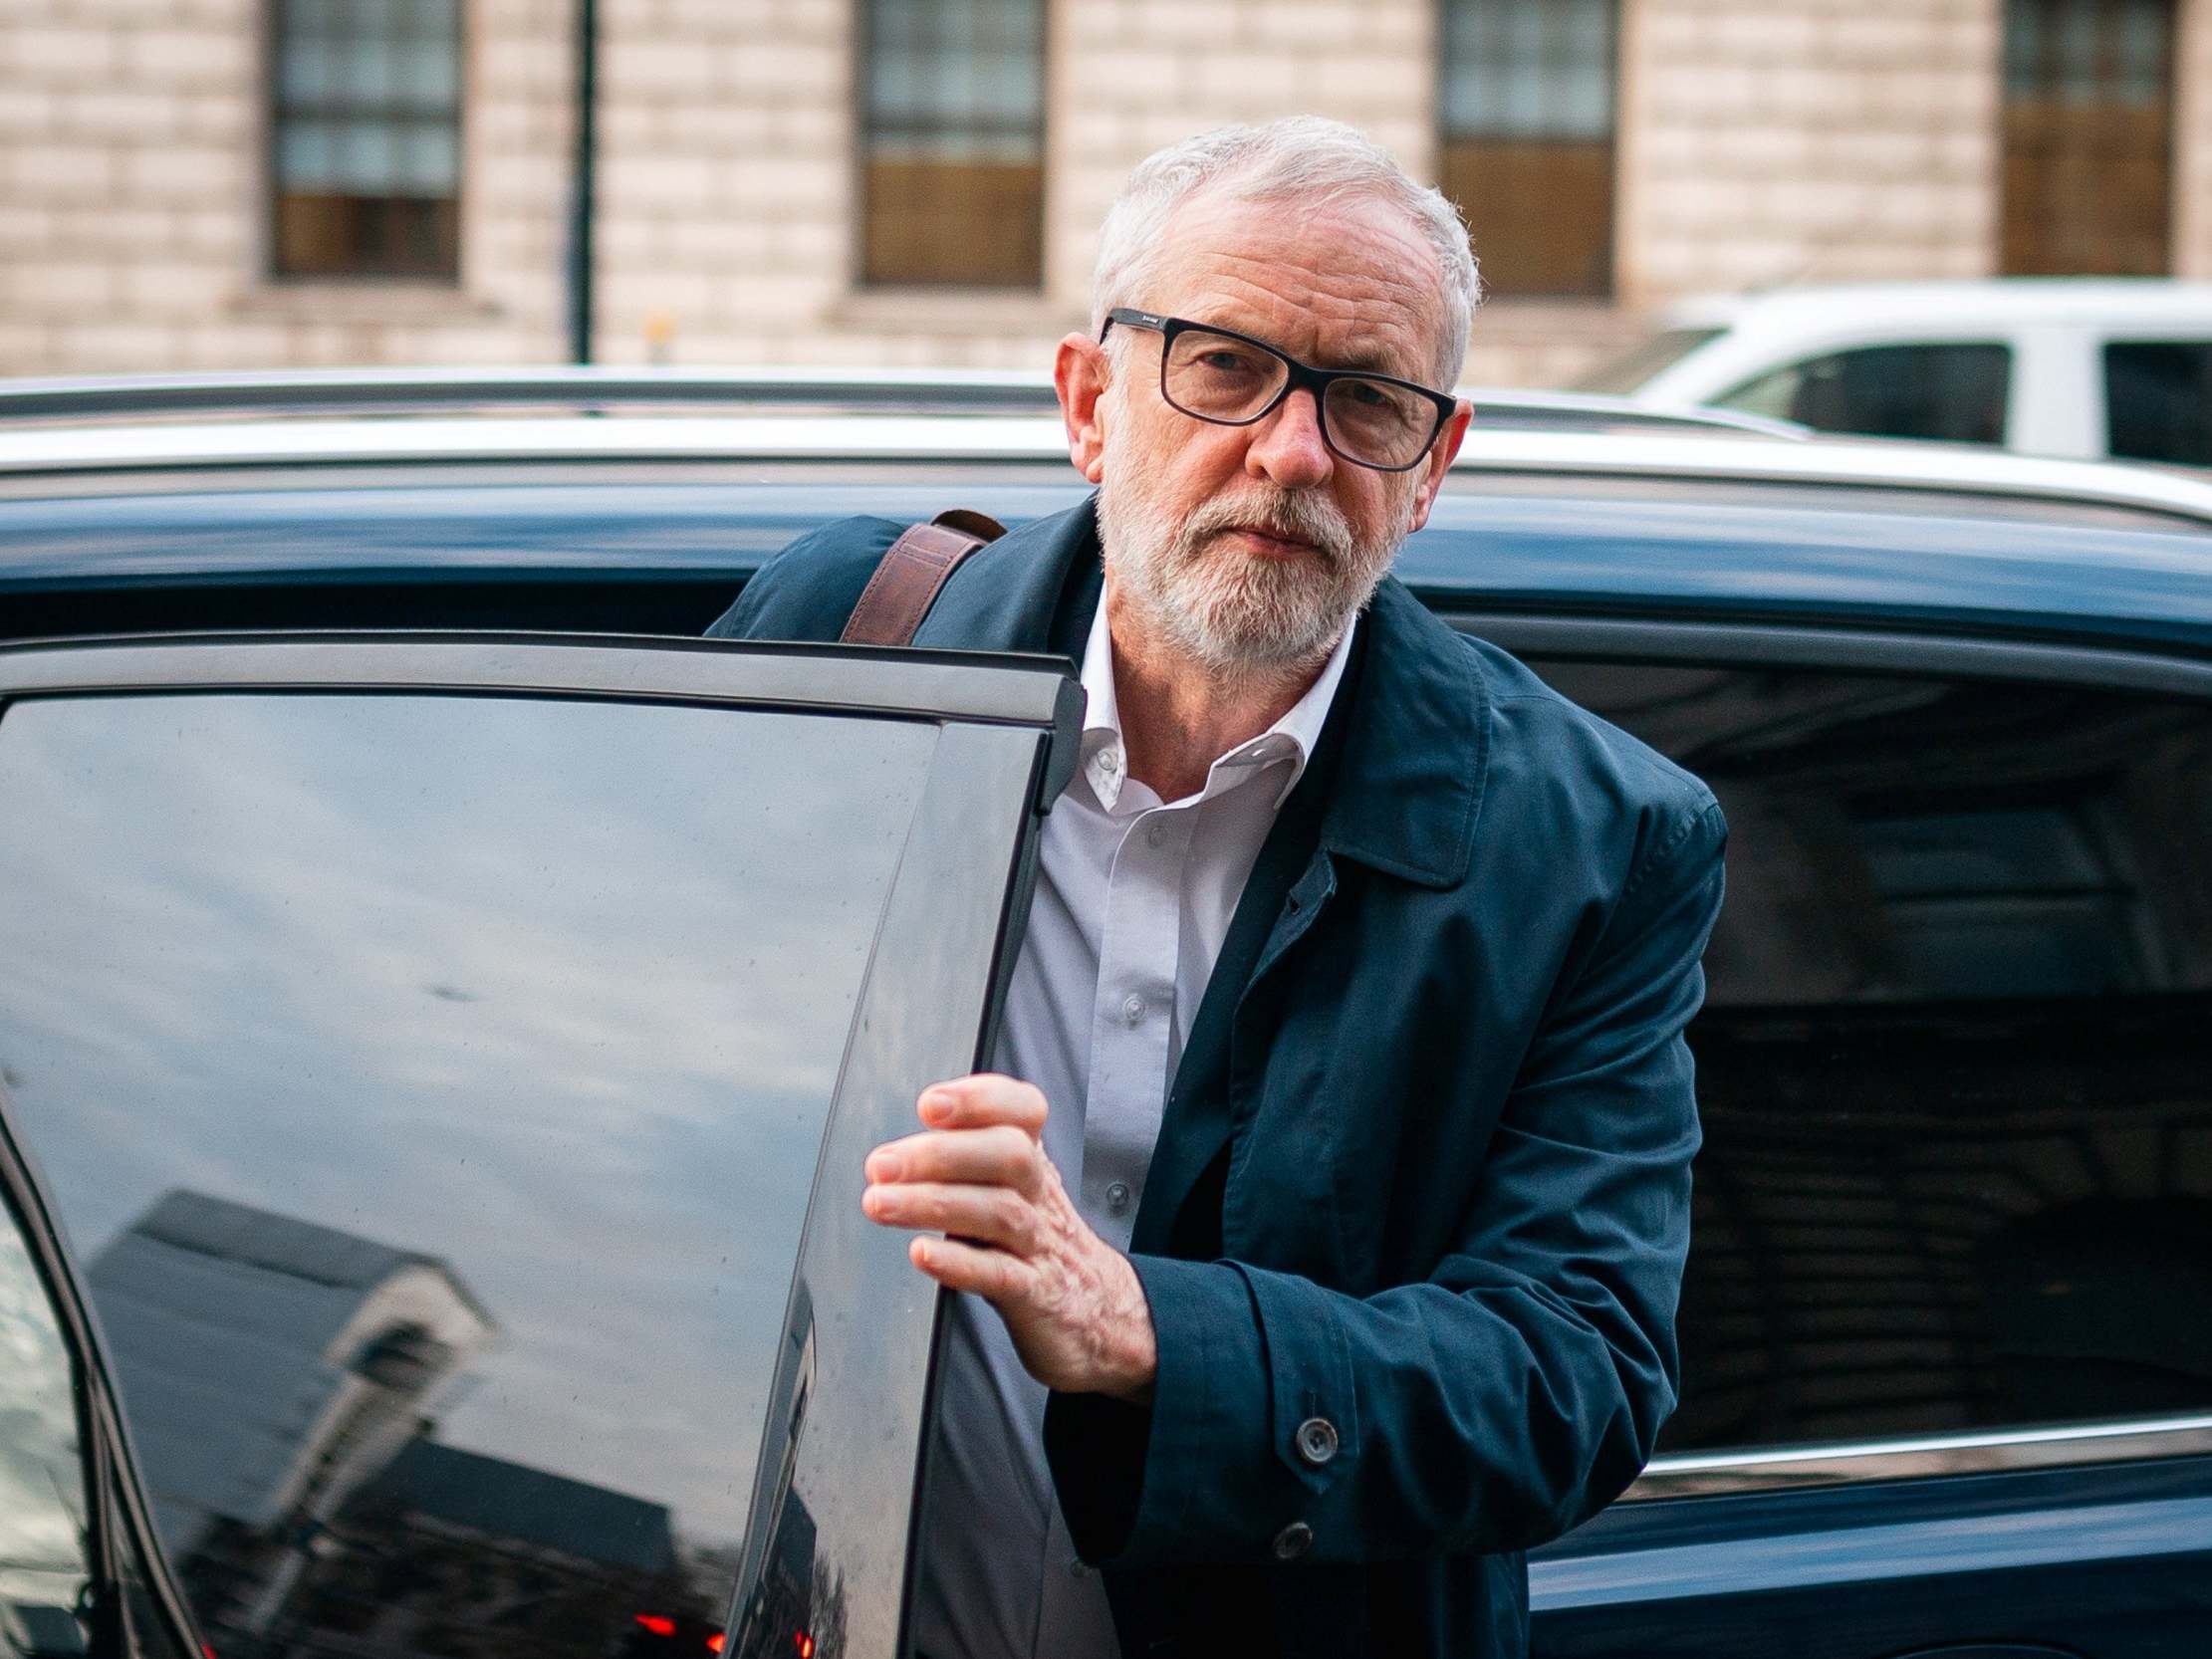 Corbyn name 'toxified' popular Labour policies in general election campaign, poll suggests